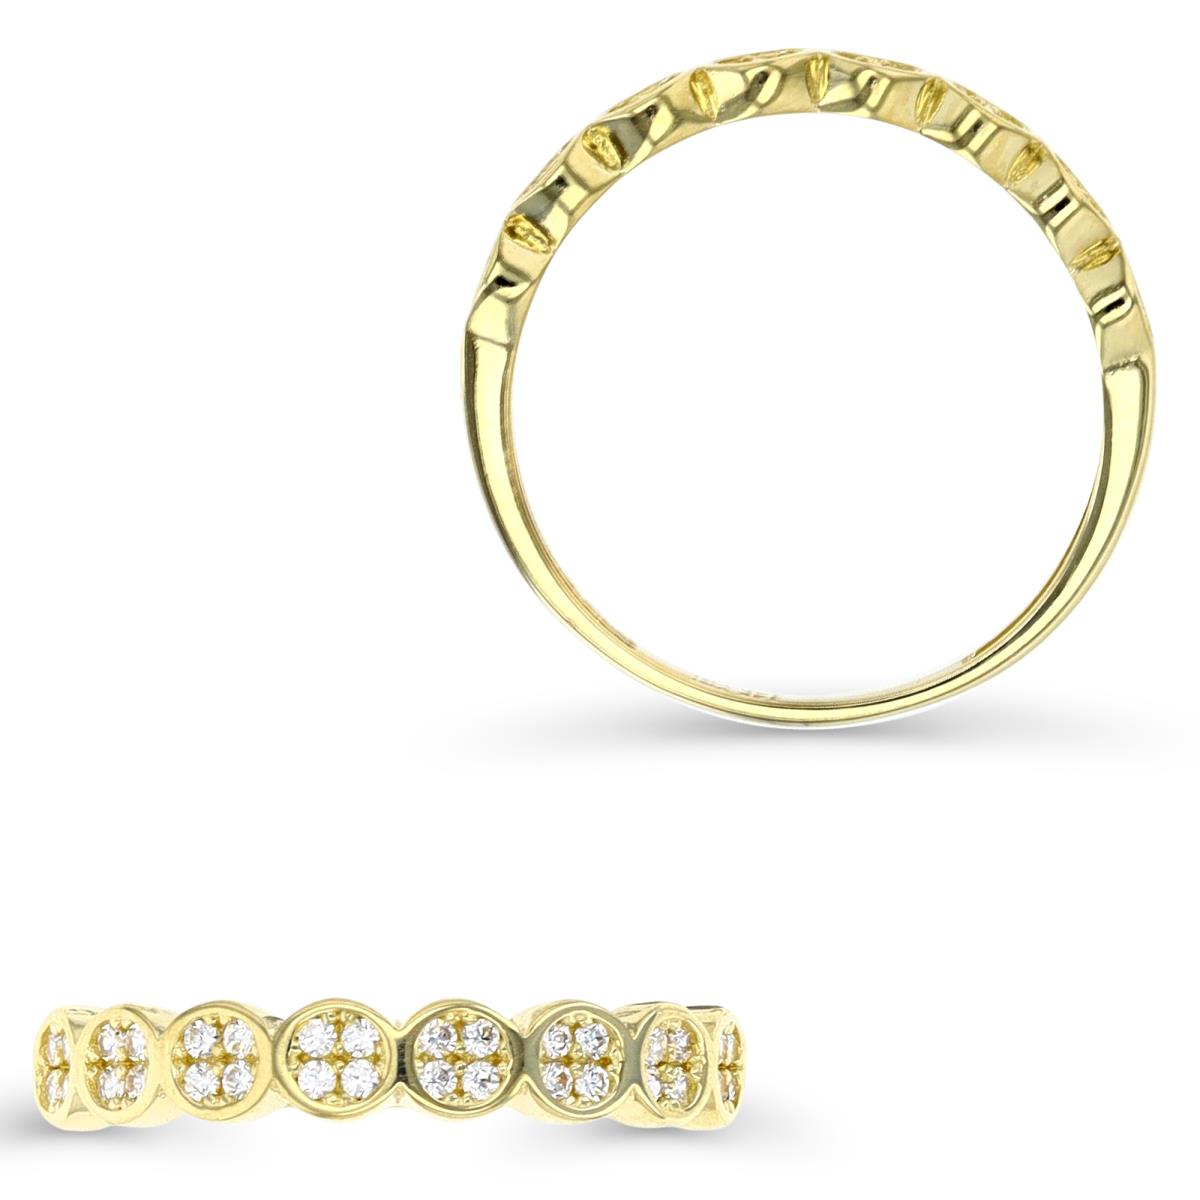 10K Yellow Gold Clusters Fashion Ring